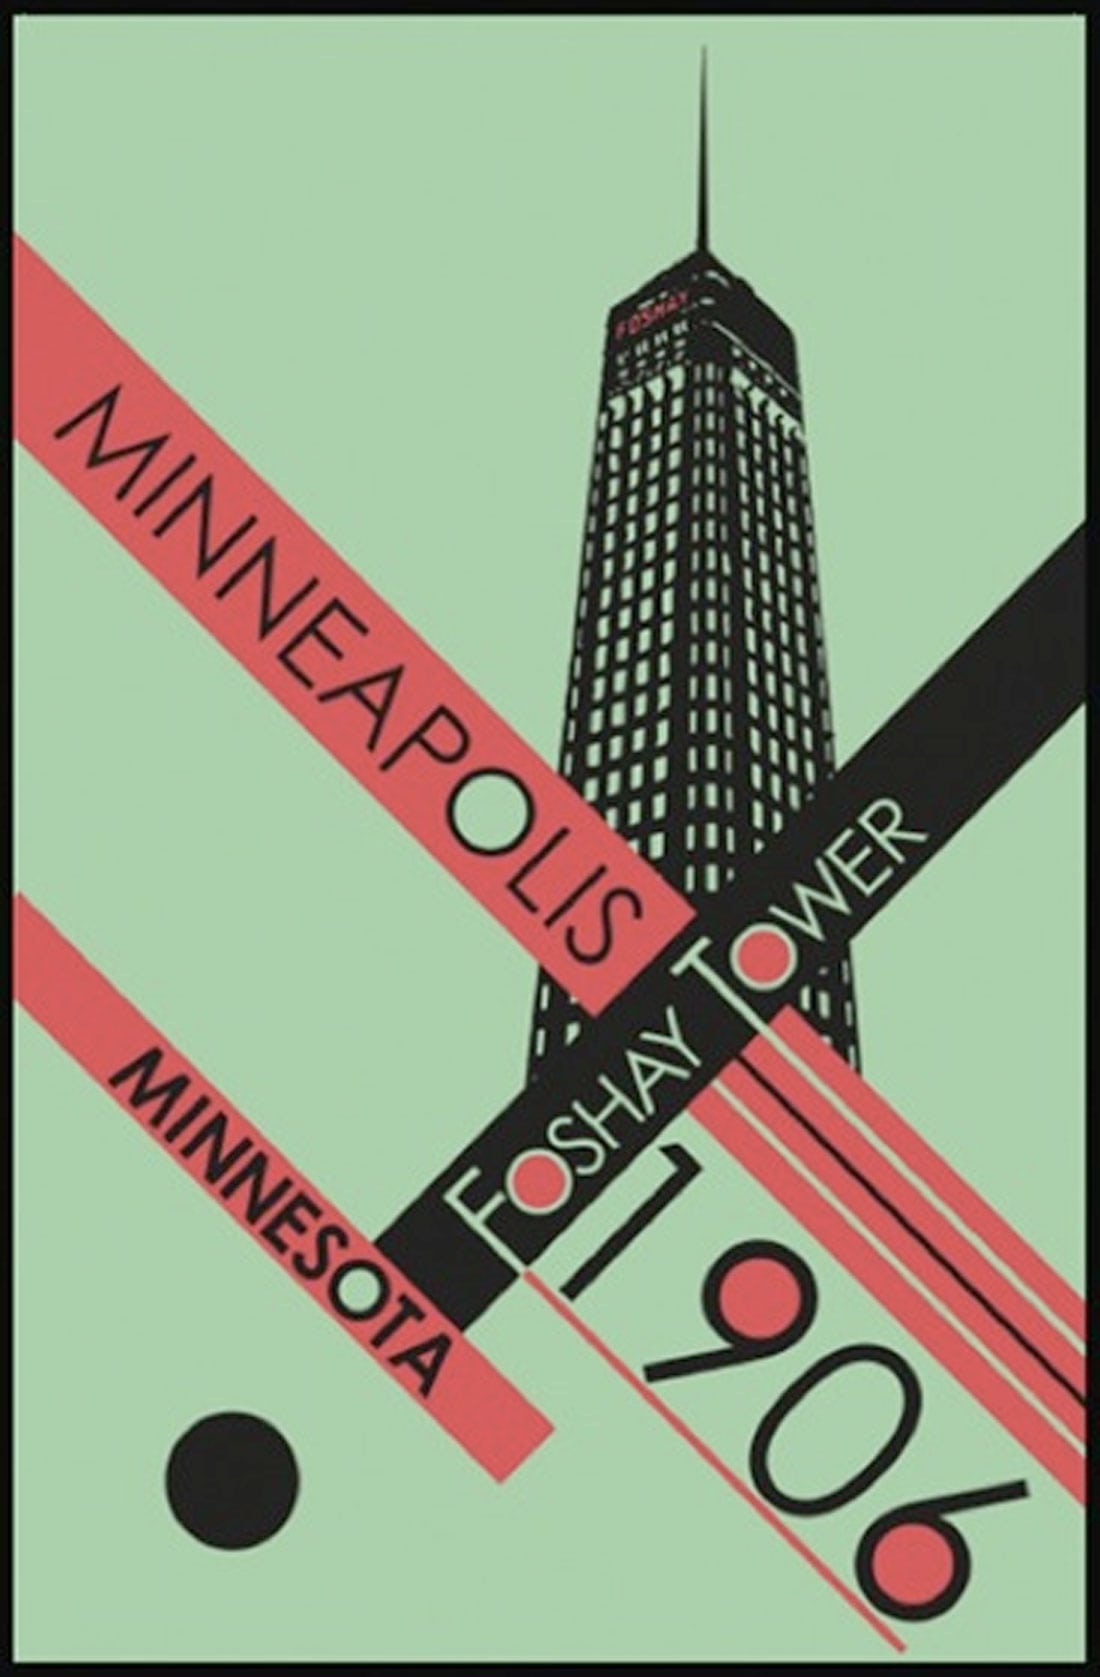 tower-poster Art Deco Graphic Design: A Classic Trend design tips 